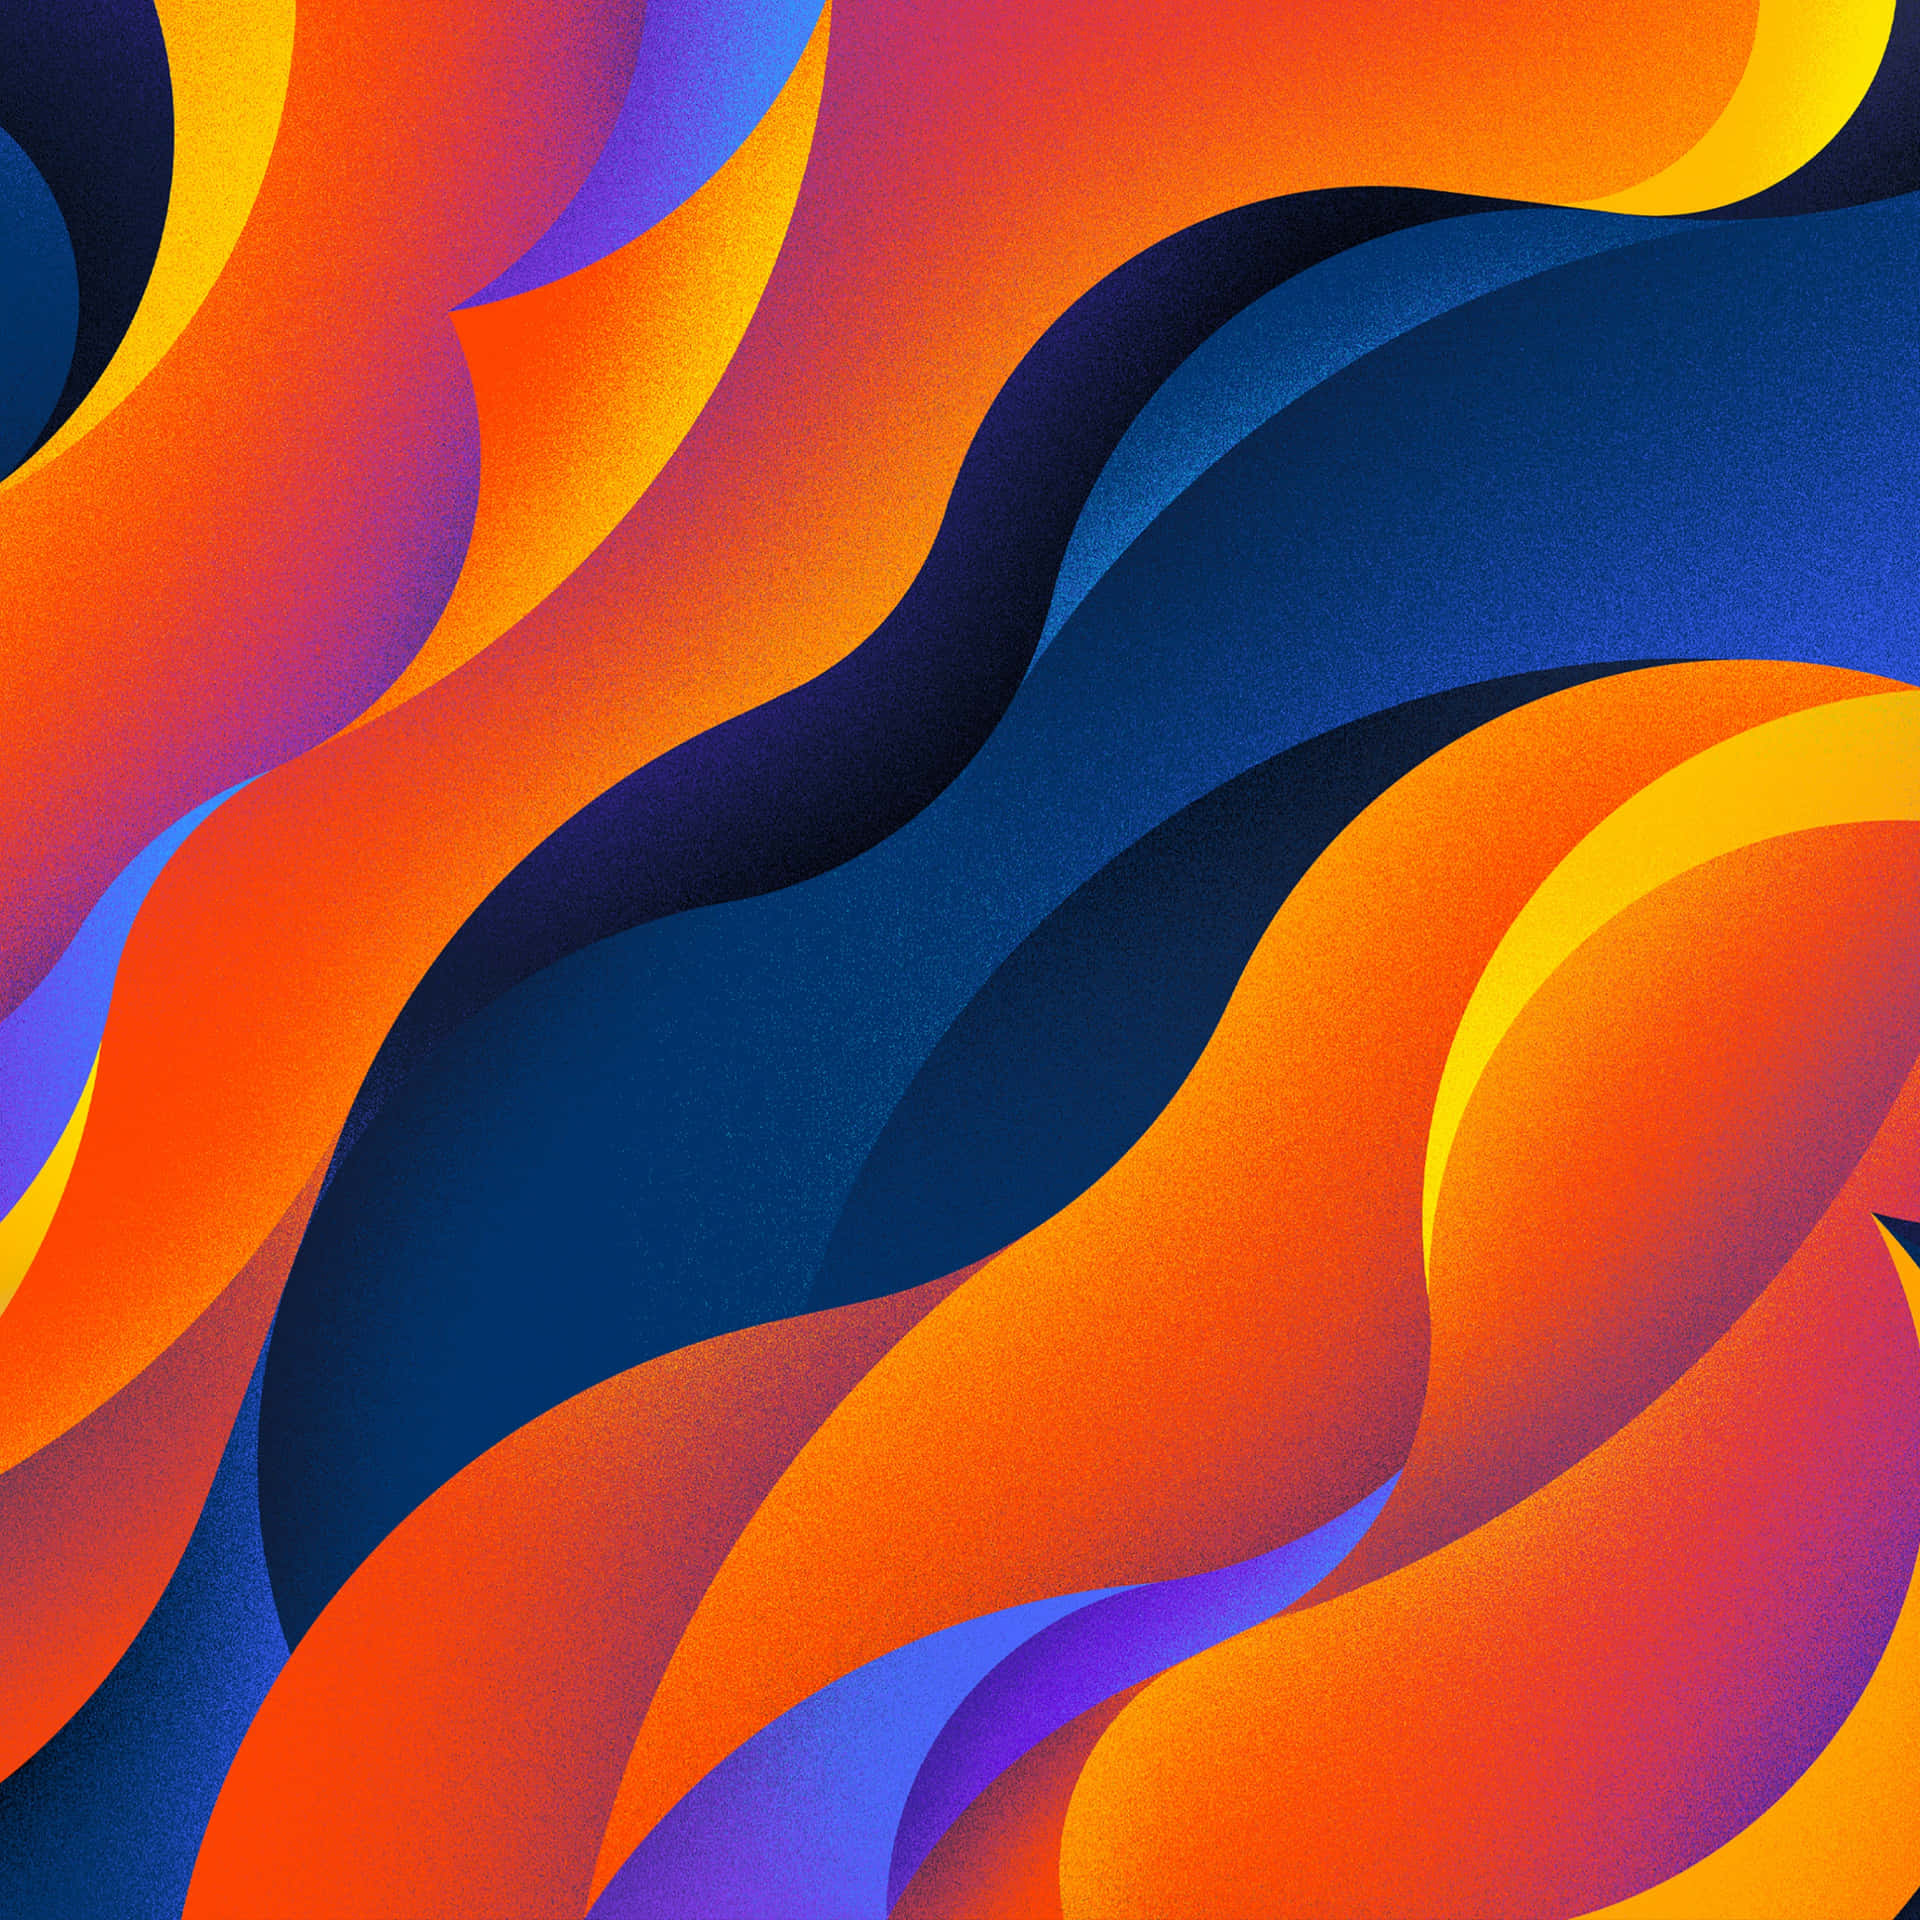 A Colorful Abstract Background With Orange, Blue, And Yellow Colors